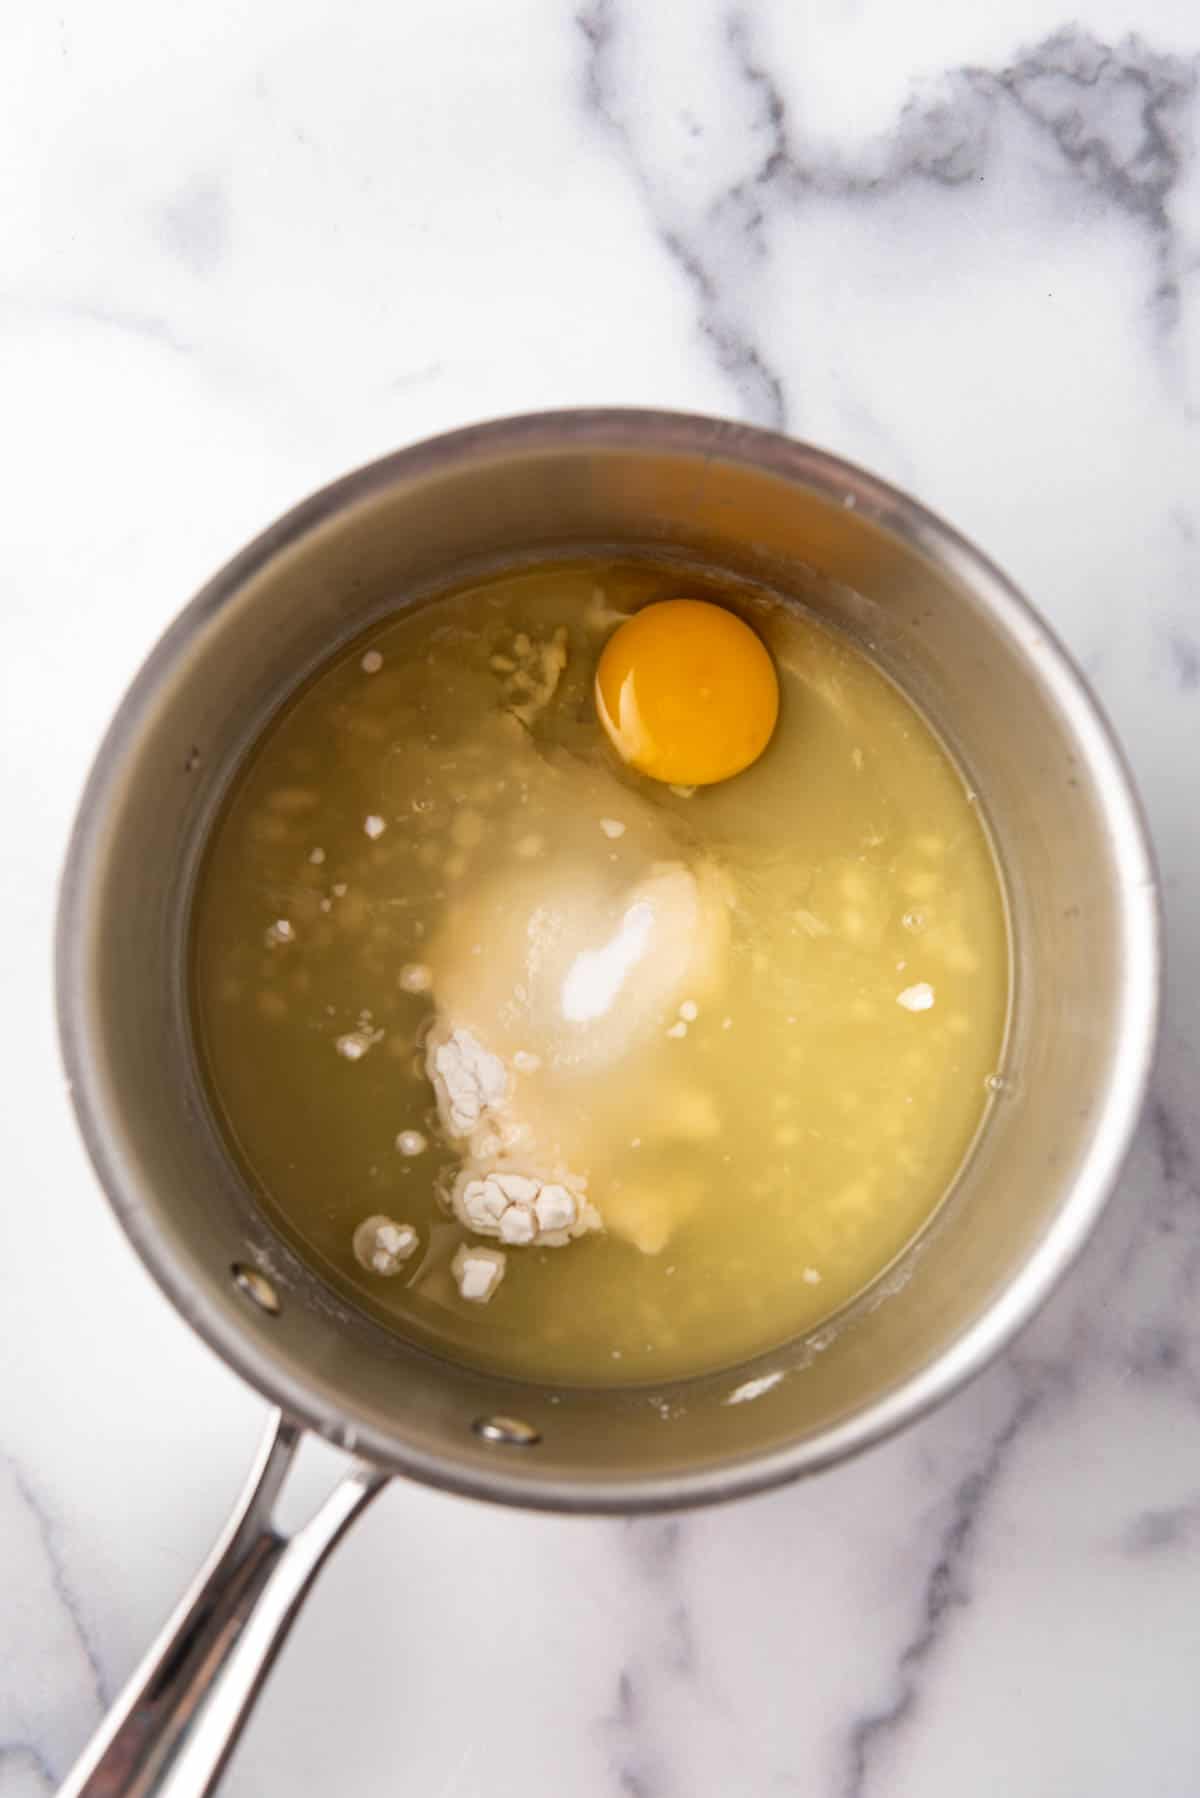 Combining pineapple juice, flour, sugar, and an egg in a saucepan.